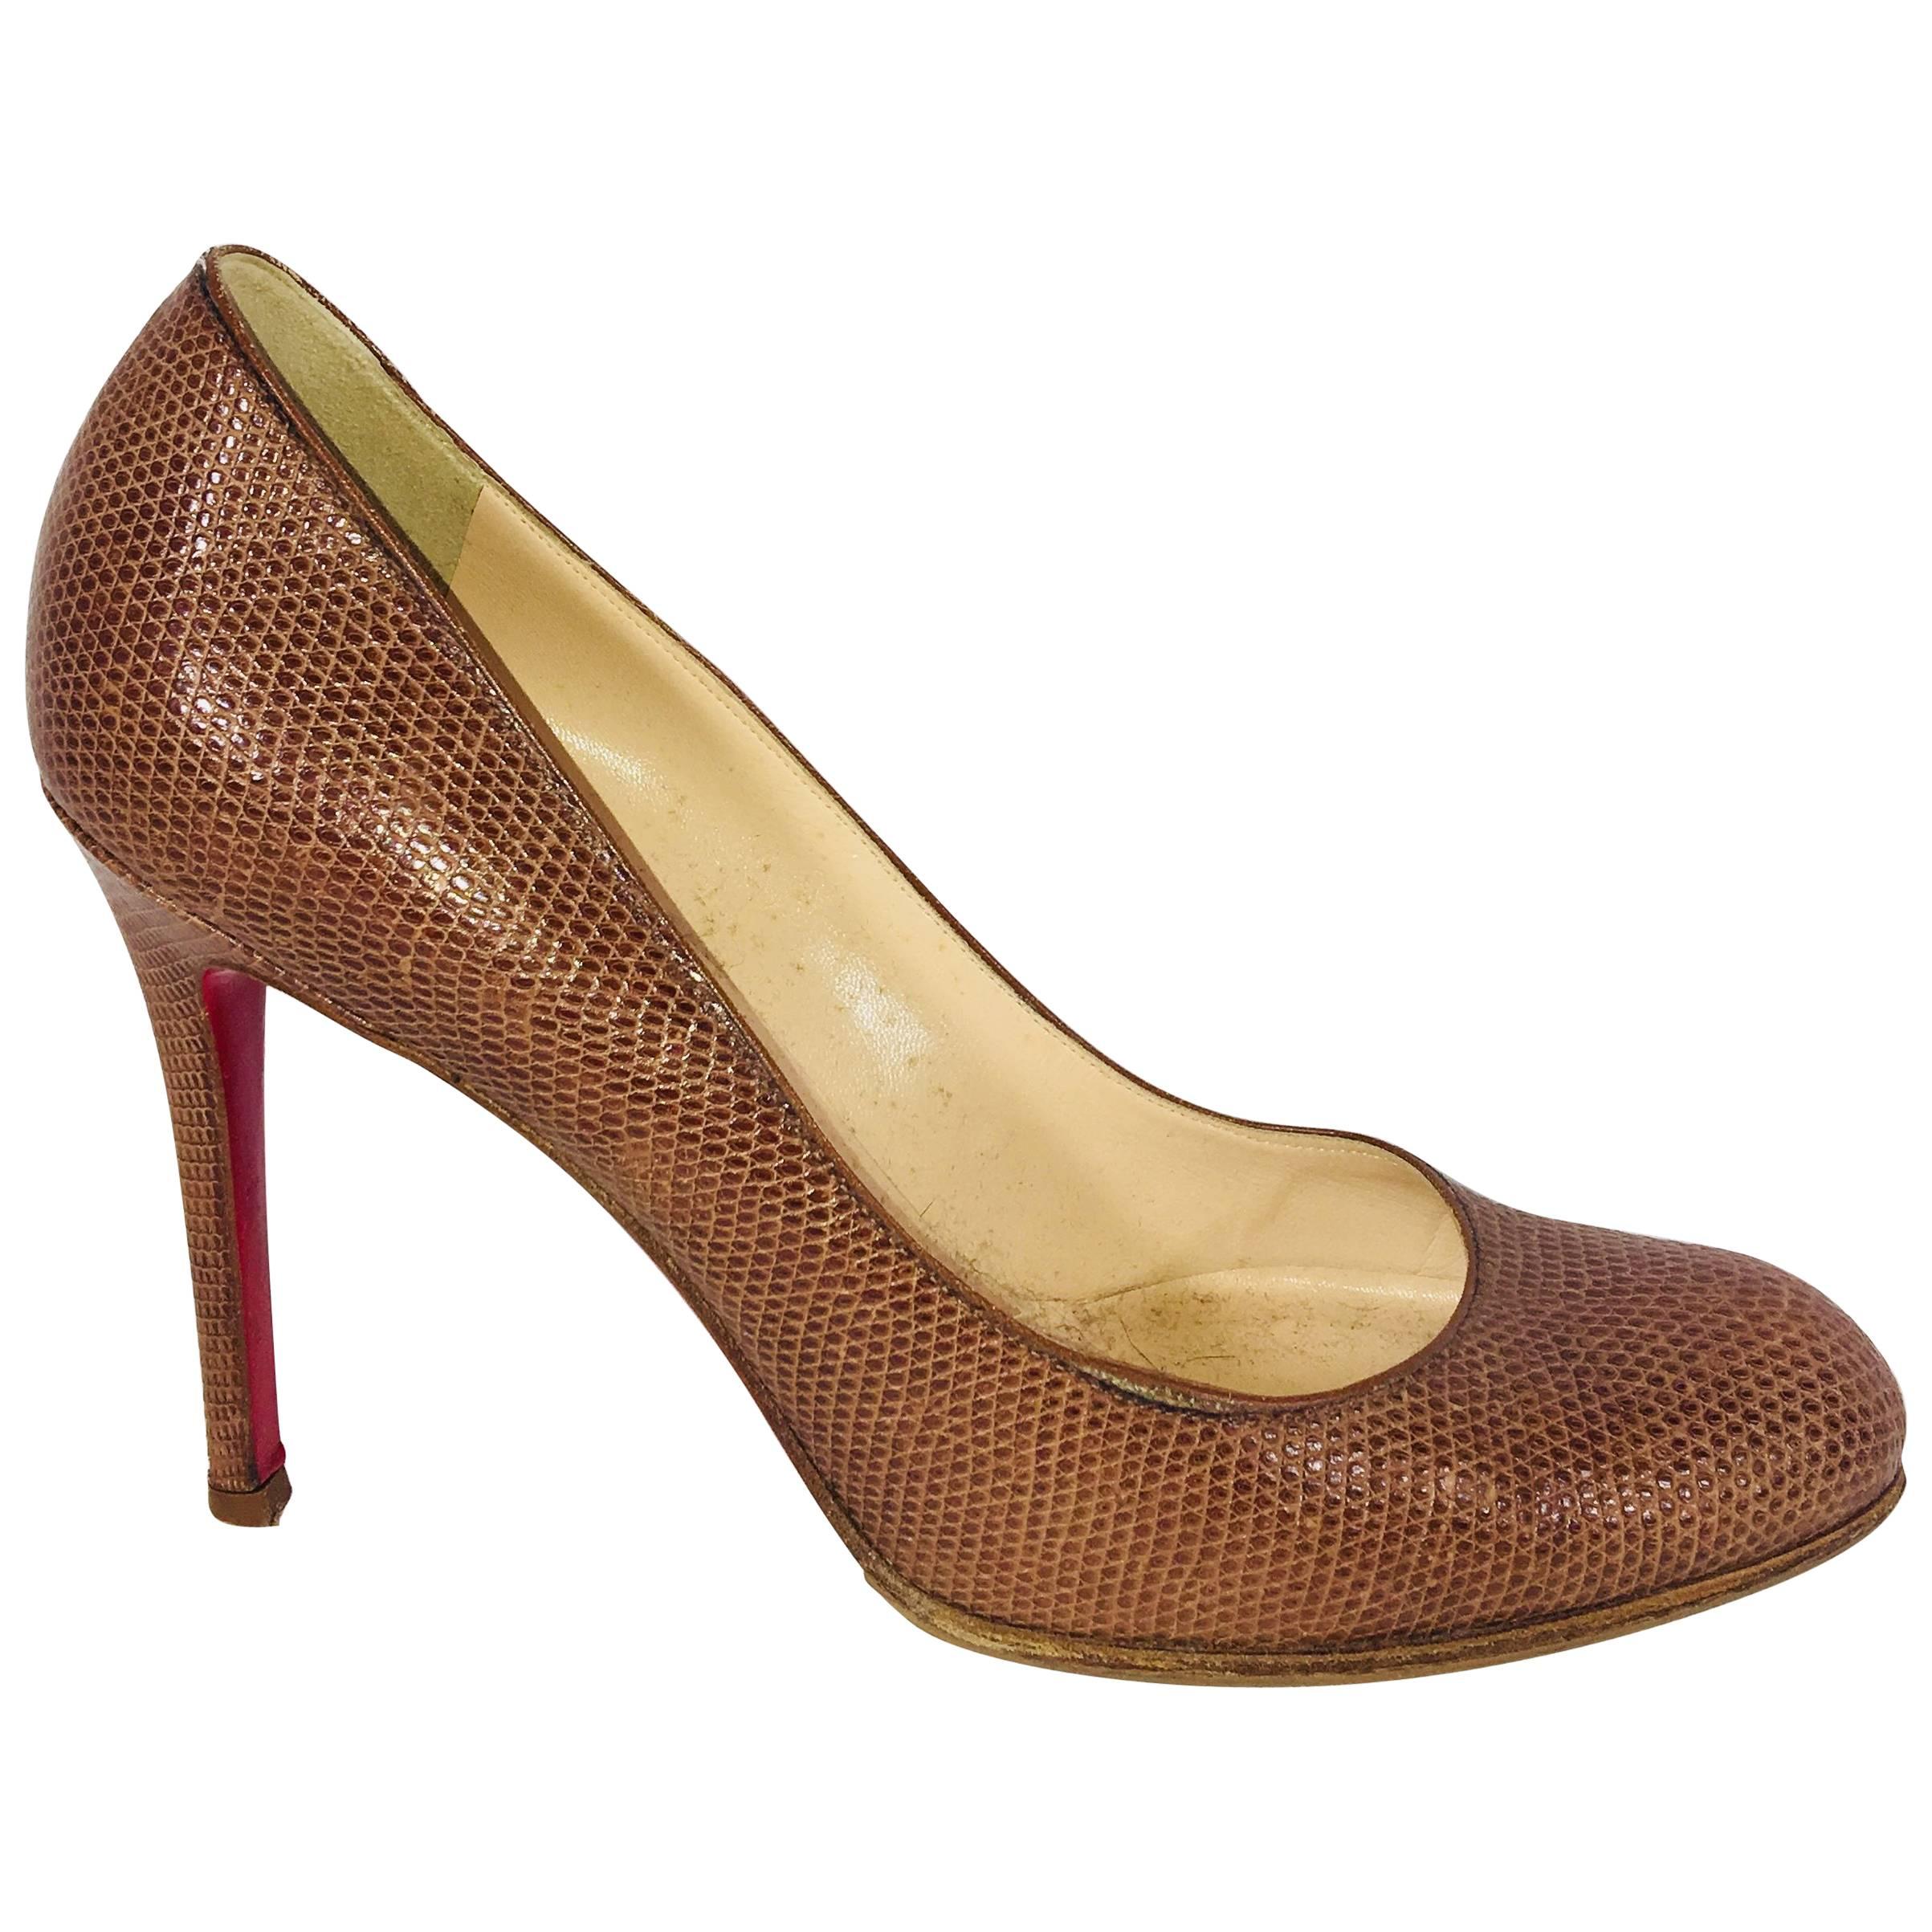 Christian Louboutin Embossed Pumps